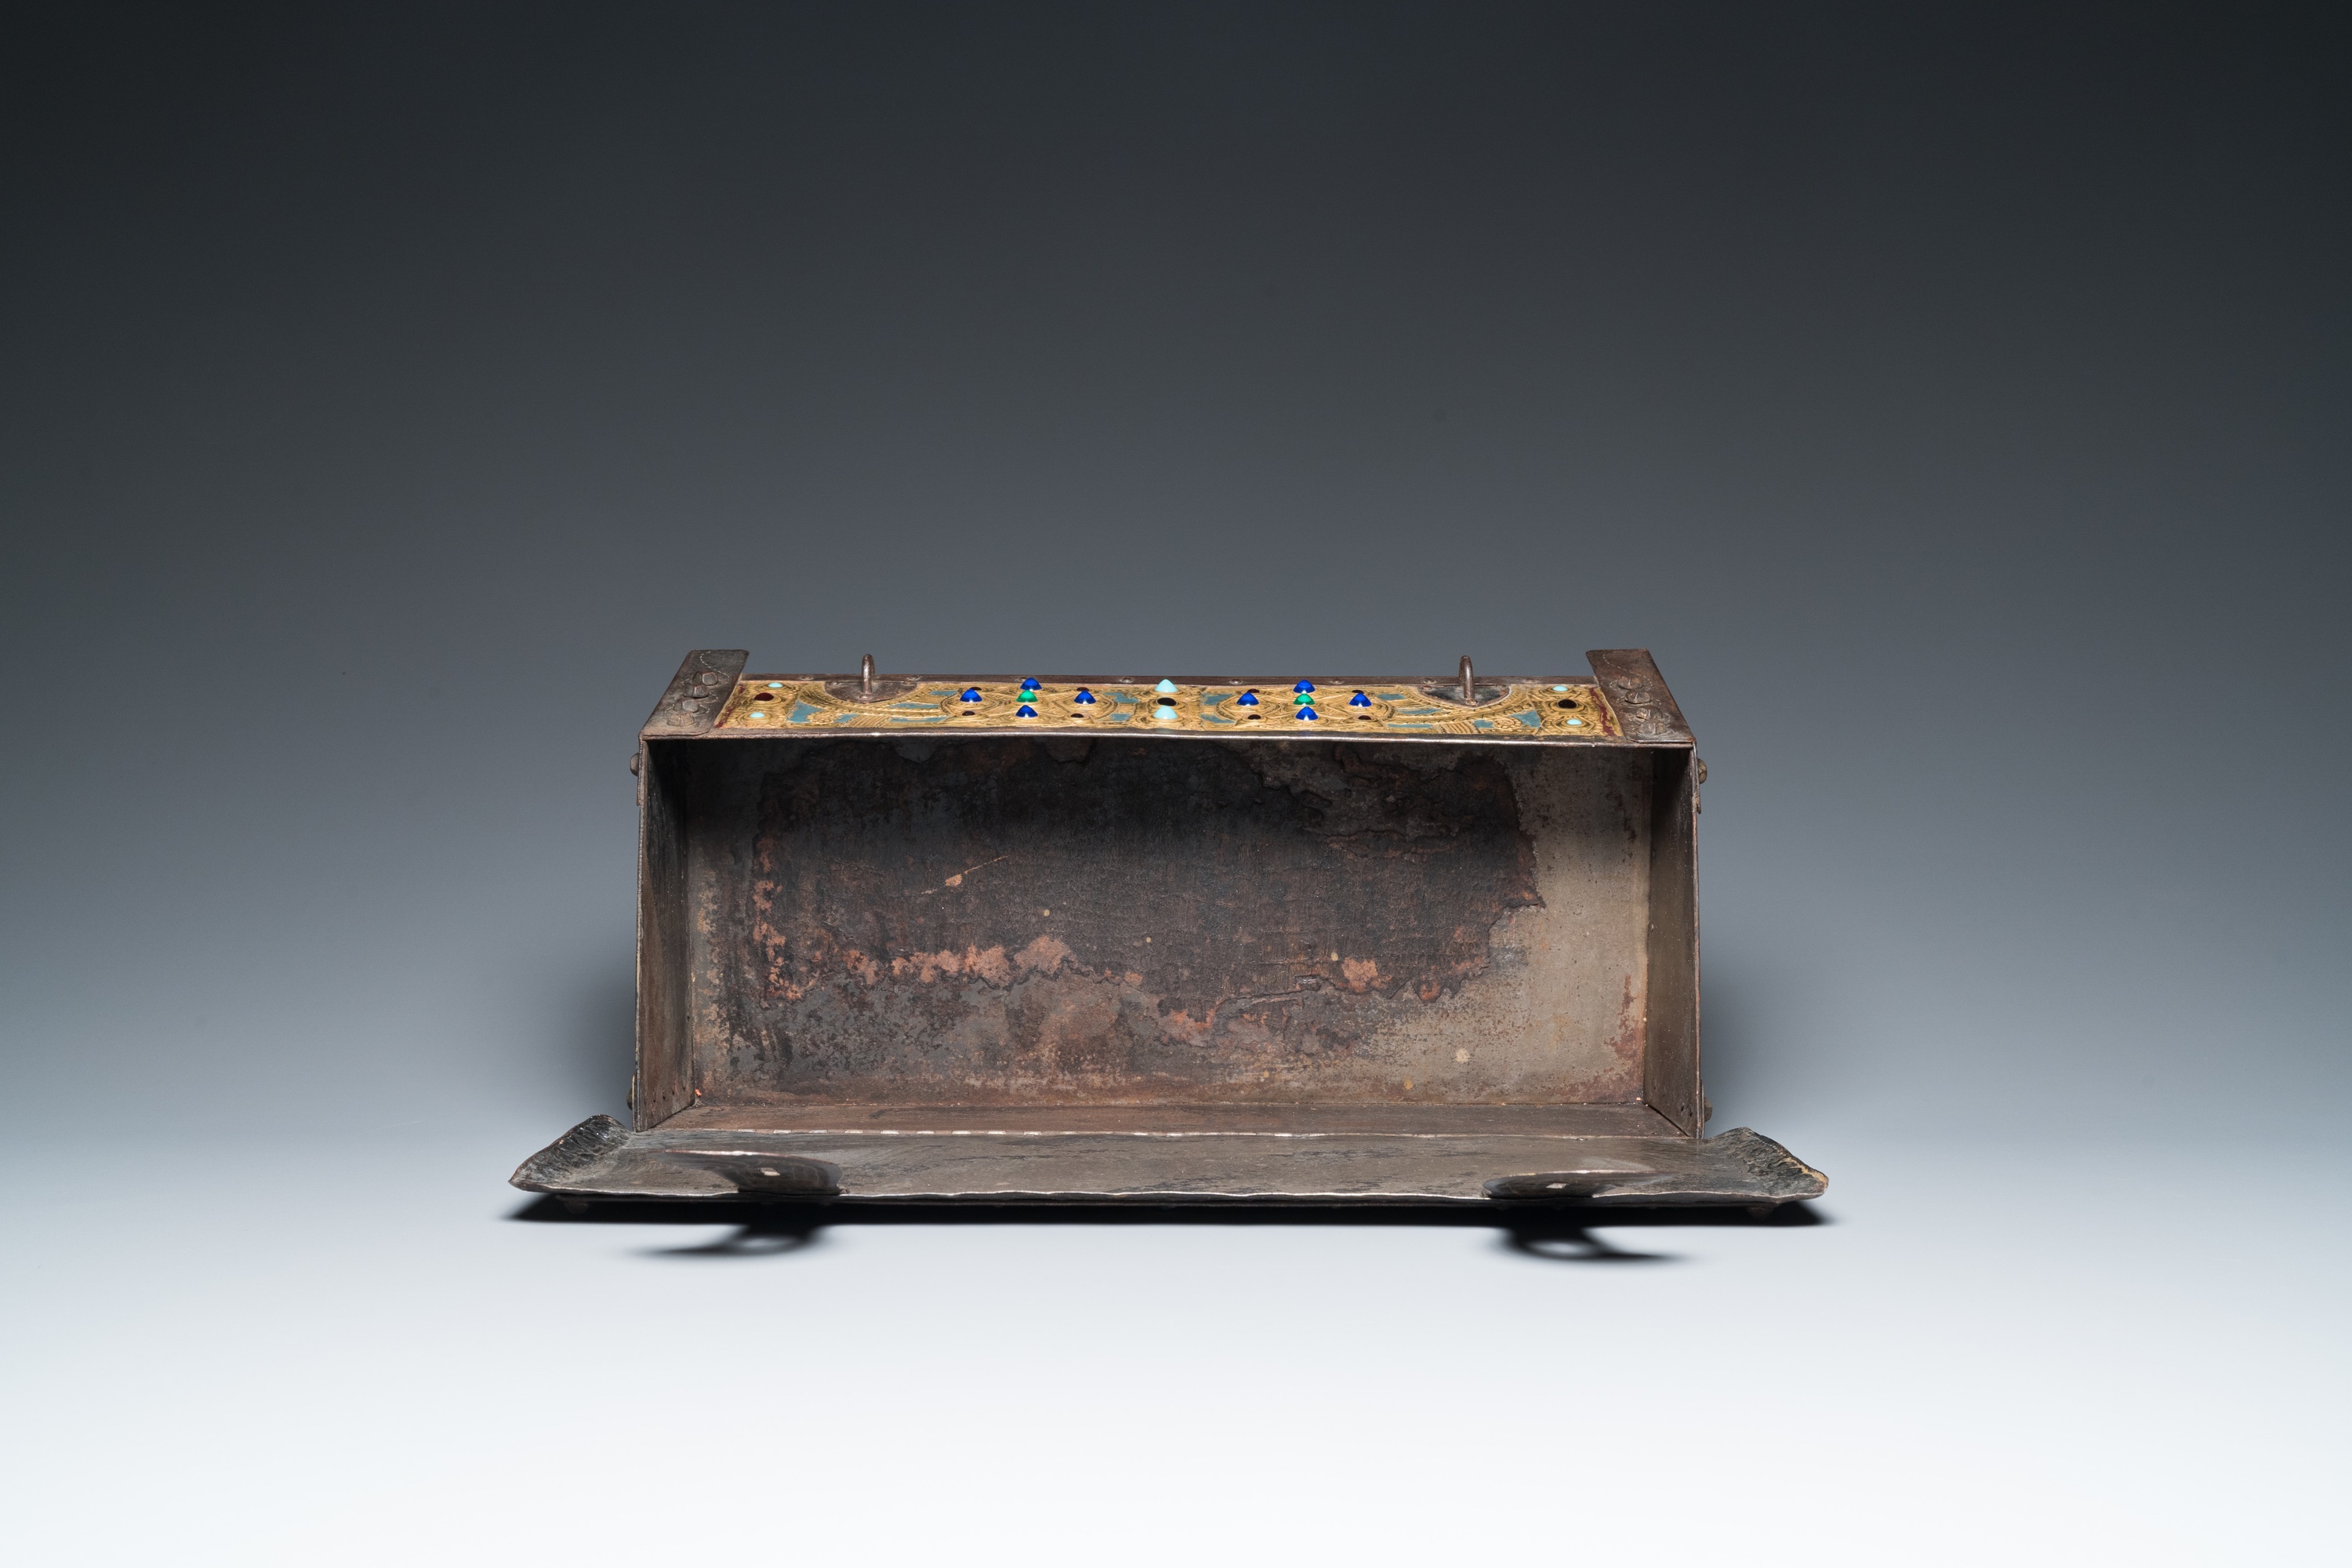 Alfred Daguet (Paris, 1875-1942): A Gothic revival repoussŽ brass and copper-mounted metal box with - Image 10 of 10